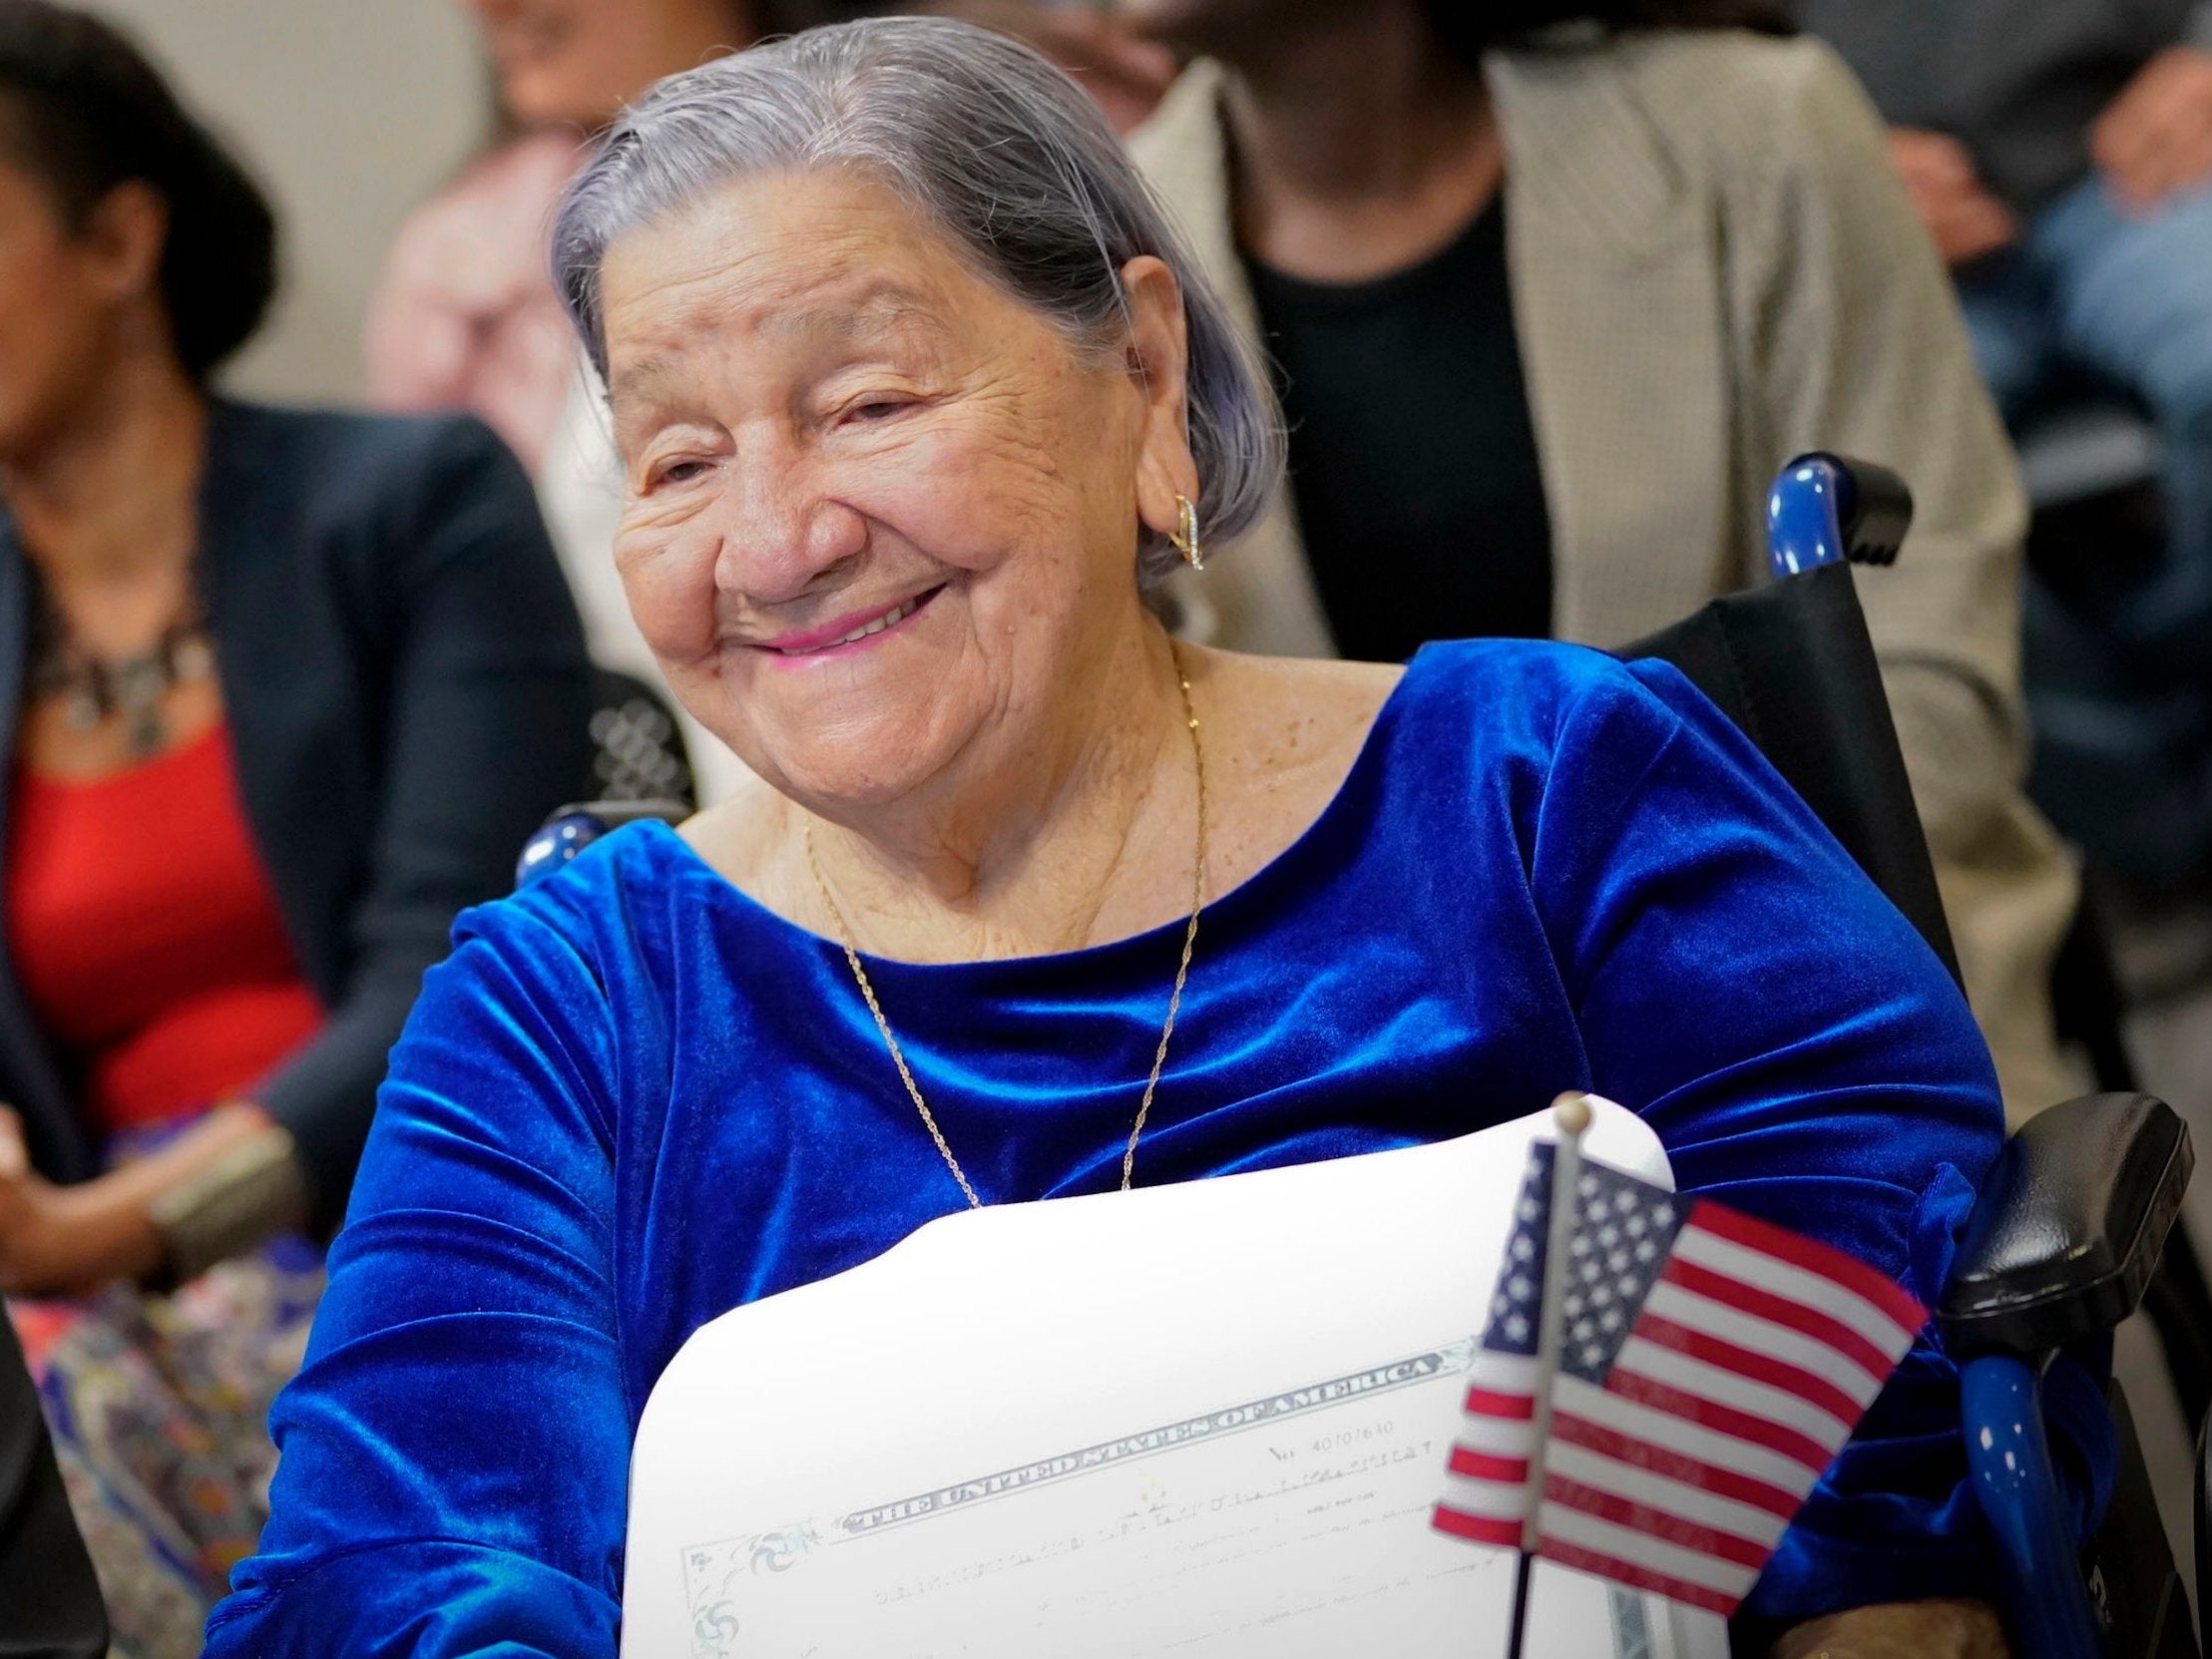 Maria Valles Bonilla came to the US at the age of 90, moving from her home in El Salvador